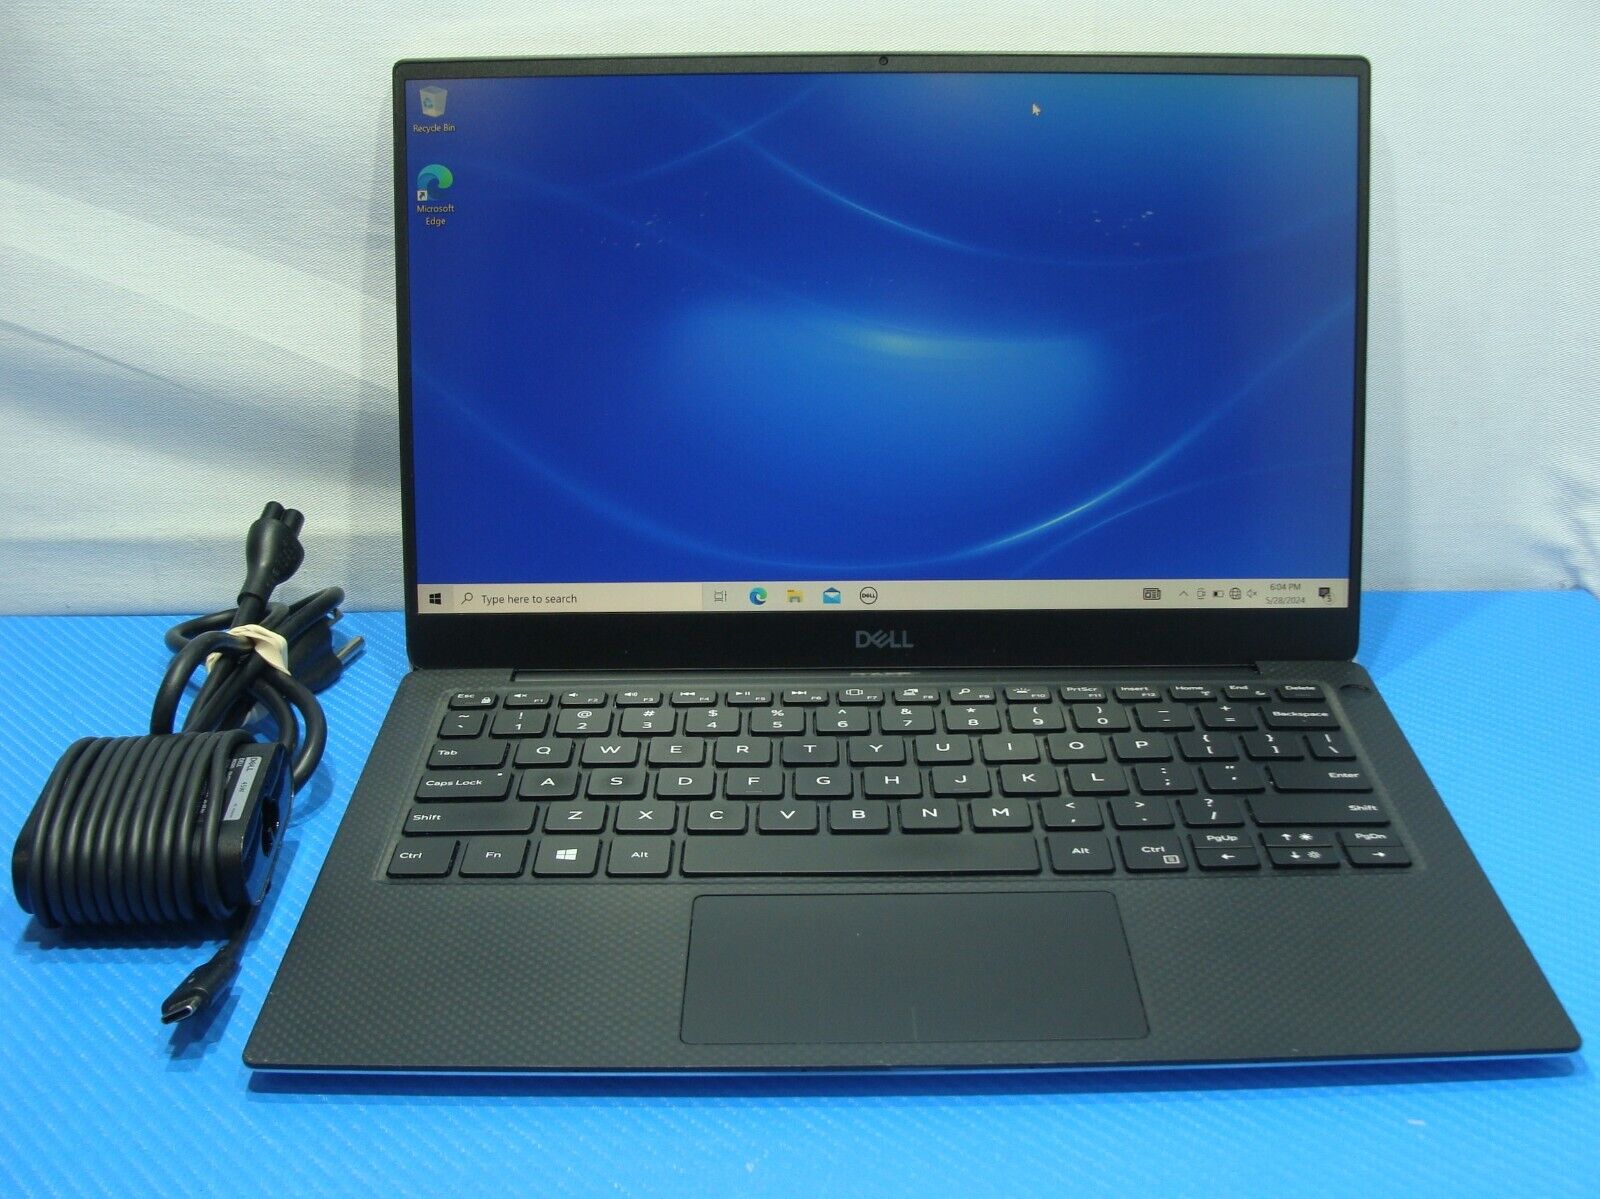 Dell XPS 13 7390 13.3